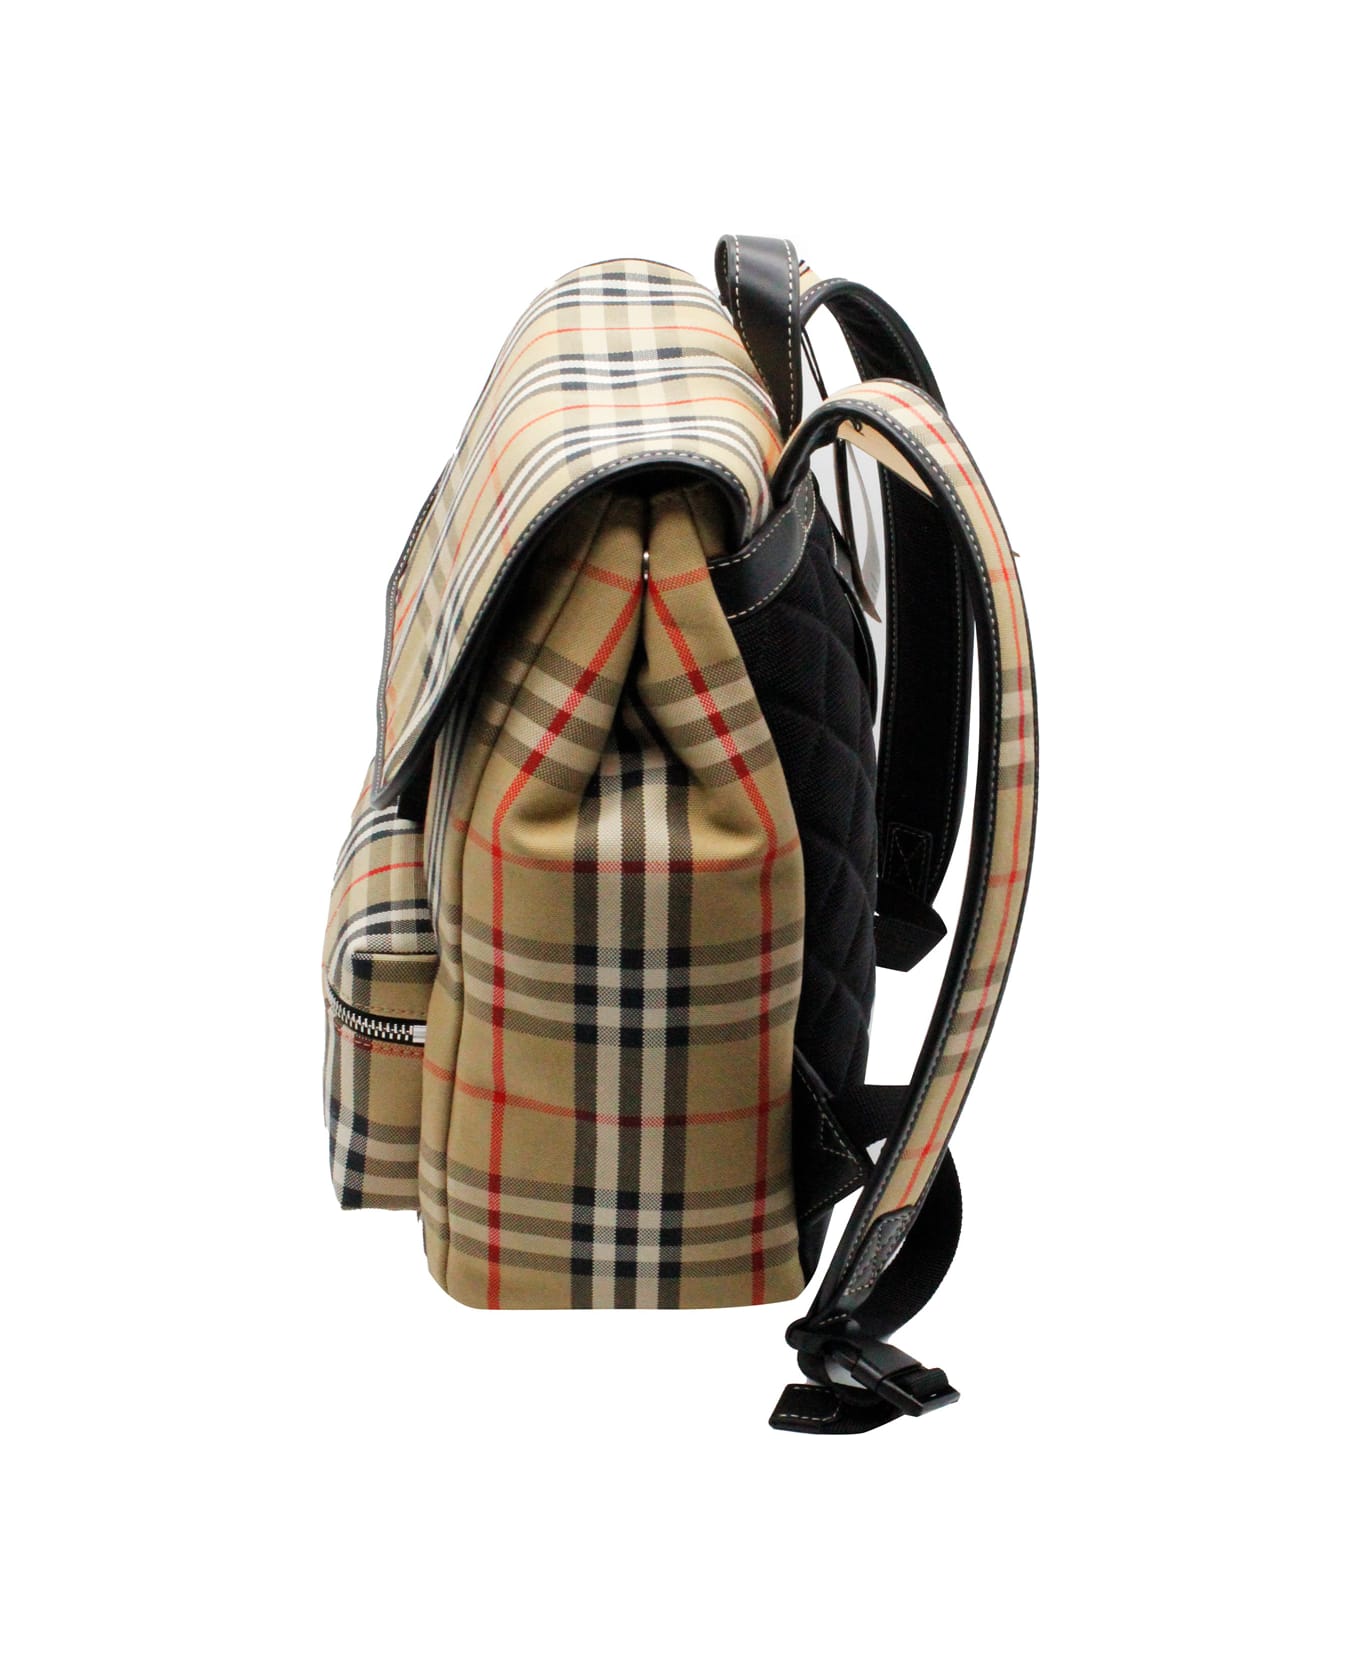 Burberry Backpack In Organic Cotton Fabric With Vintage Check Motif With Adjustable Shoulder Straps. - Beige